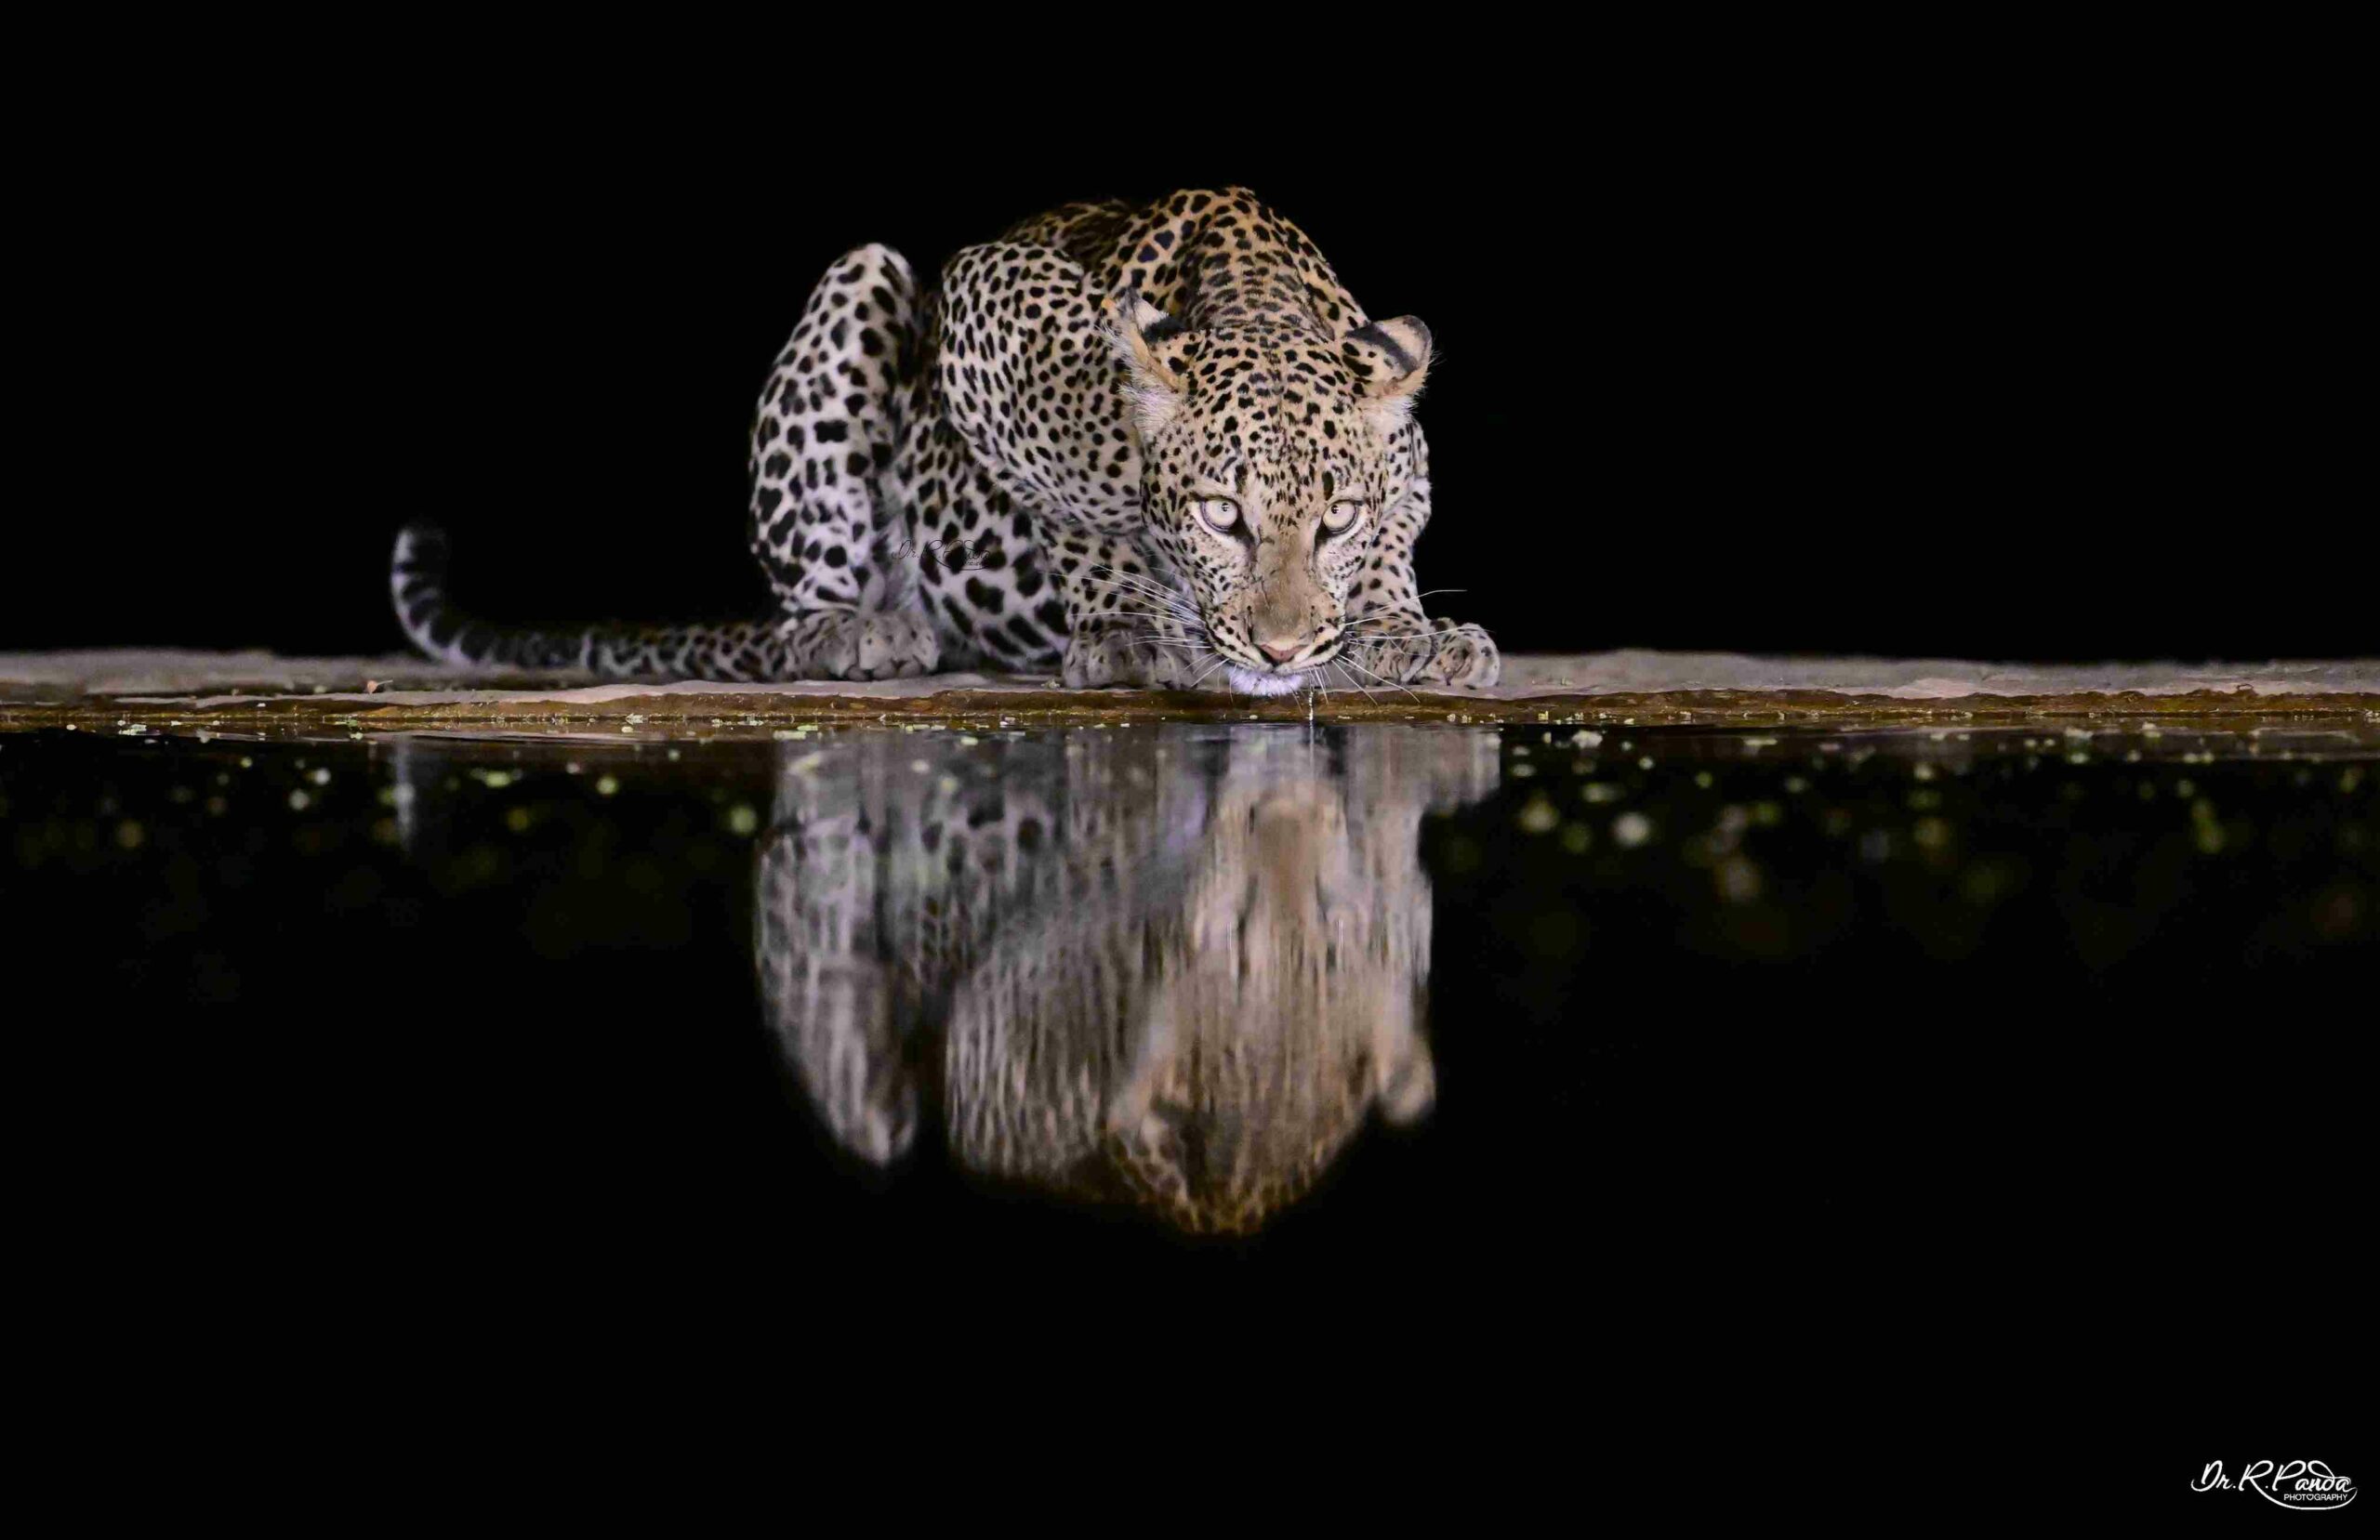 The leopard spotted in Kenya's national park